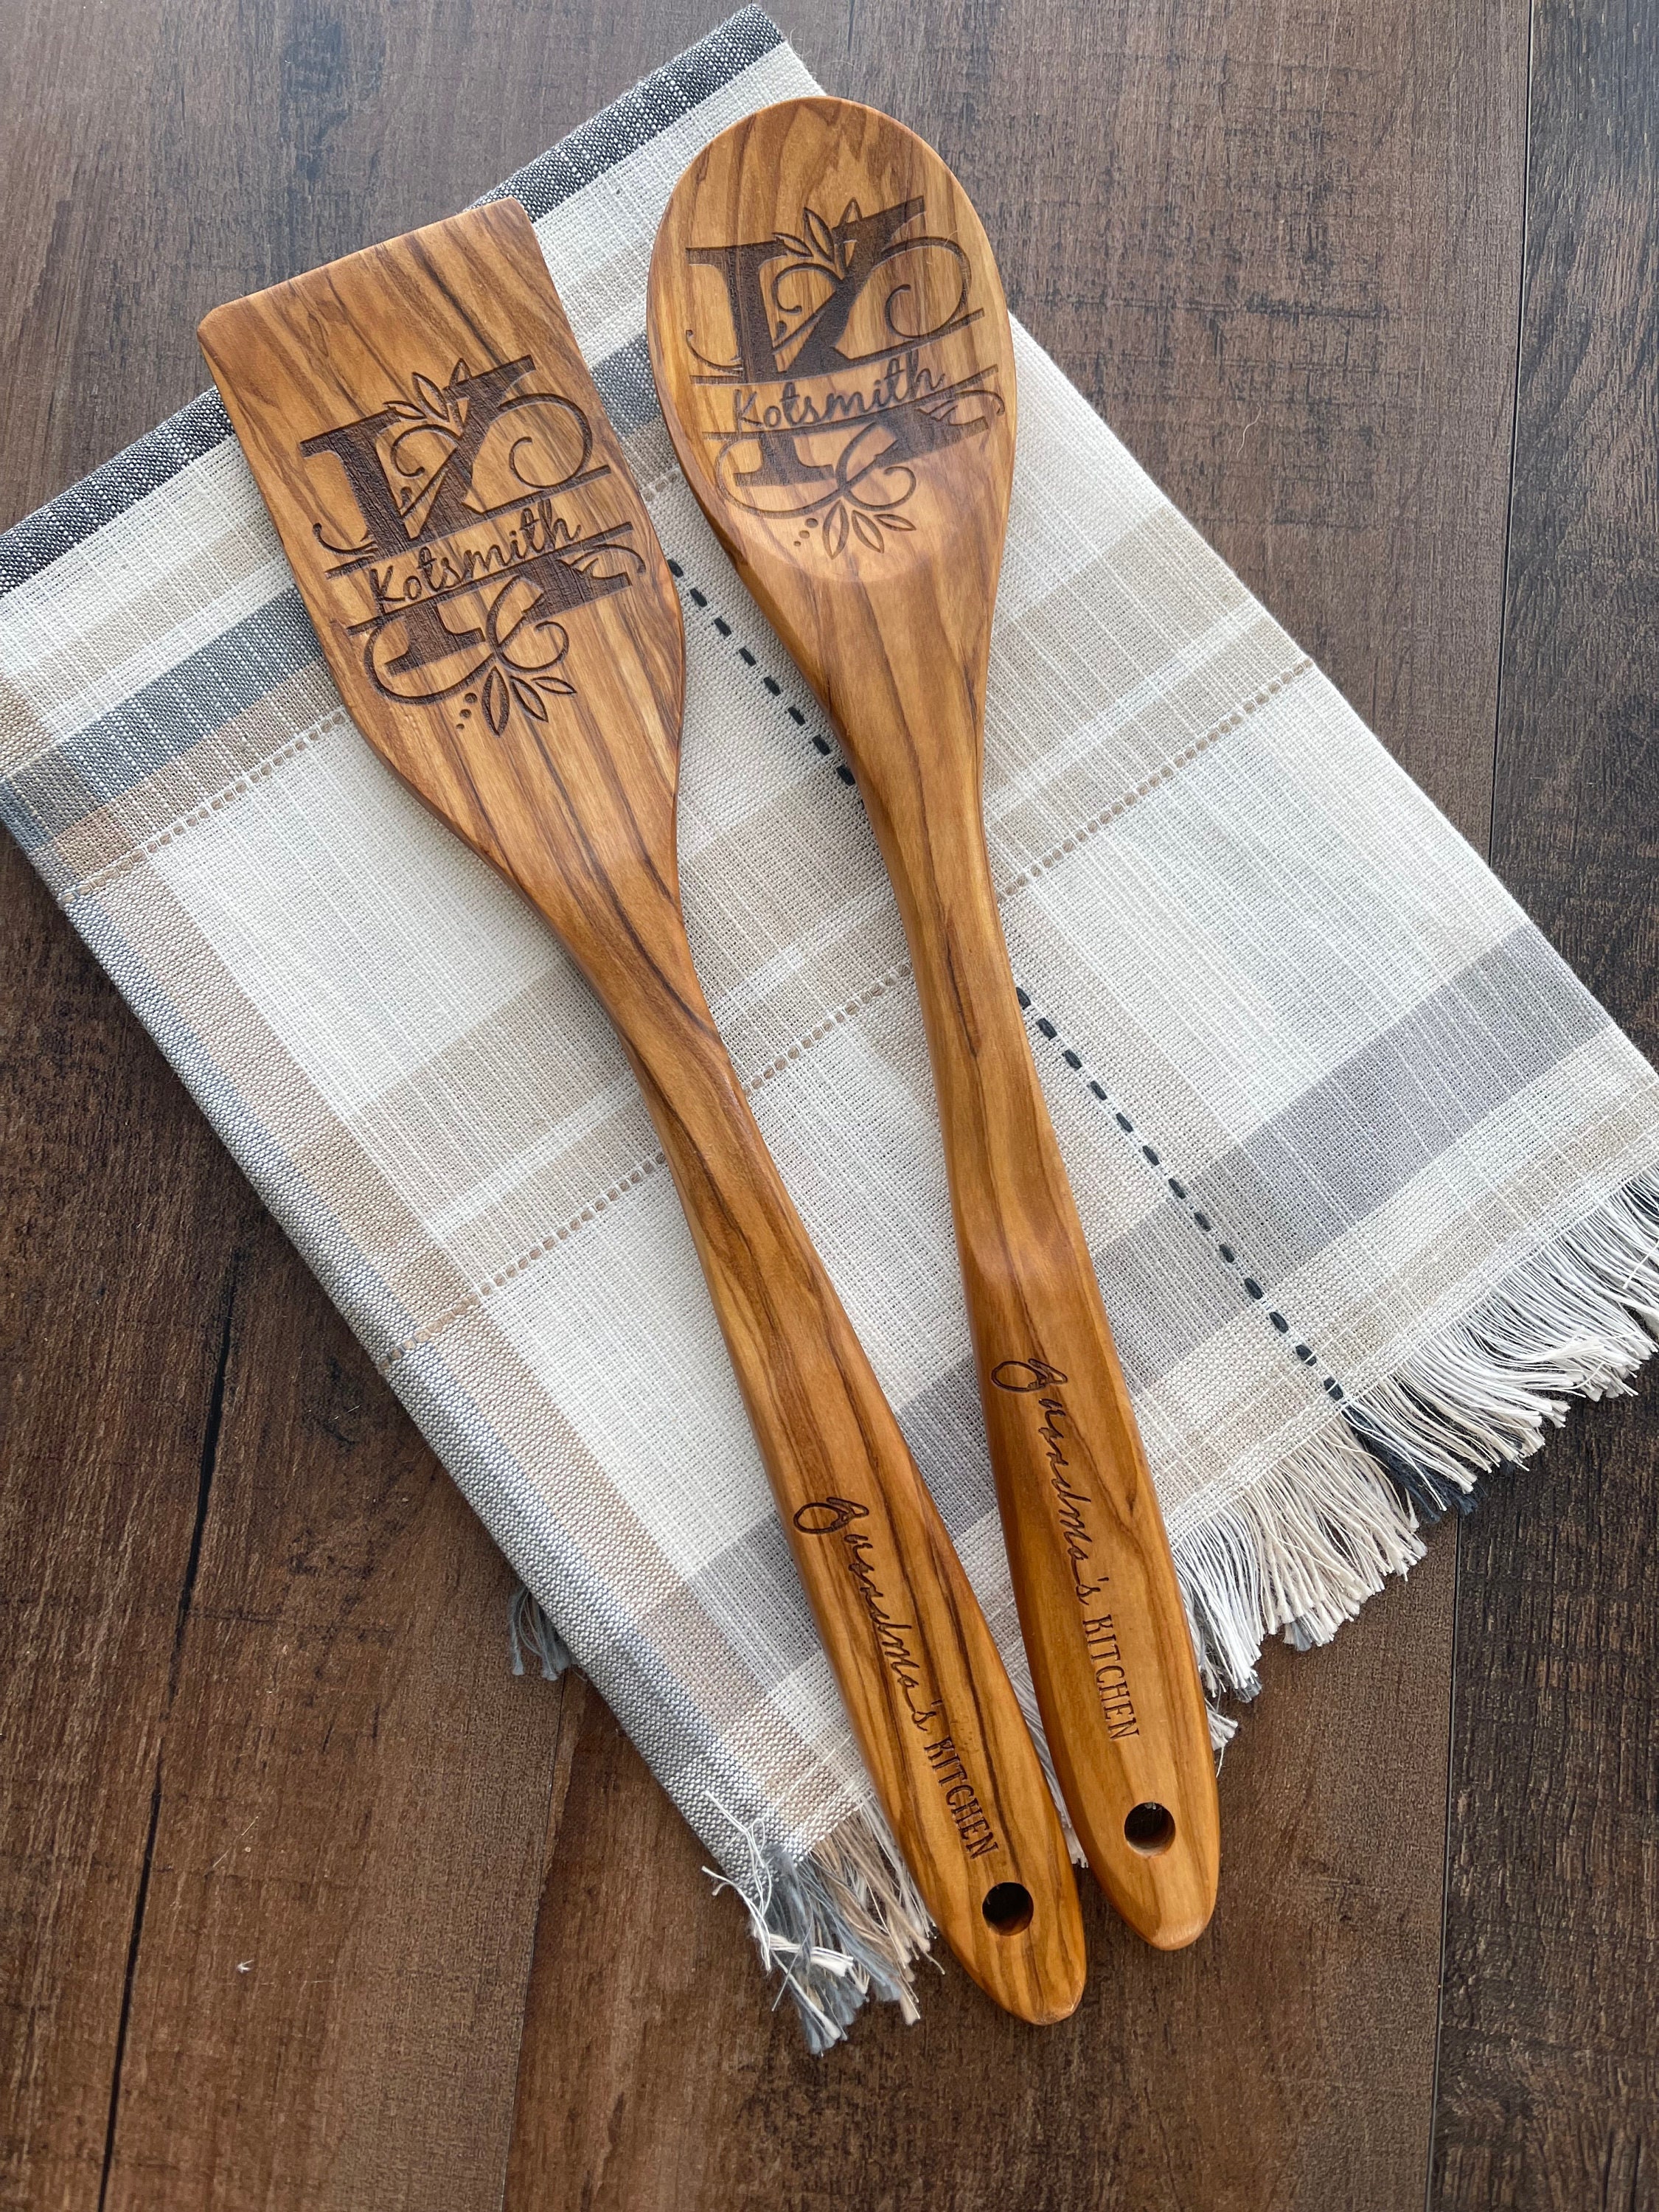 EUUPS Personalized Christmas Gifts for Mom from Daughter Son - Mom Birthday Gifts Women Mother’s Day Gifts - Wooden Cooking Spoons with Funny Apron